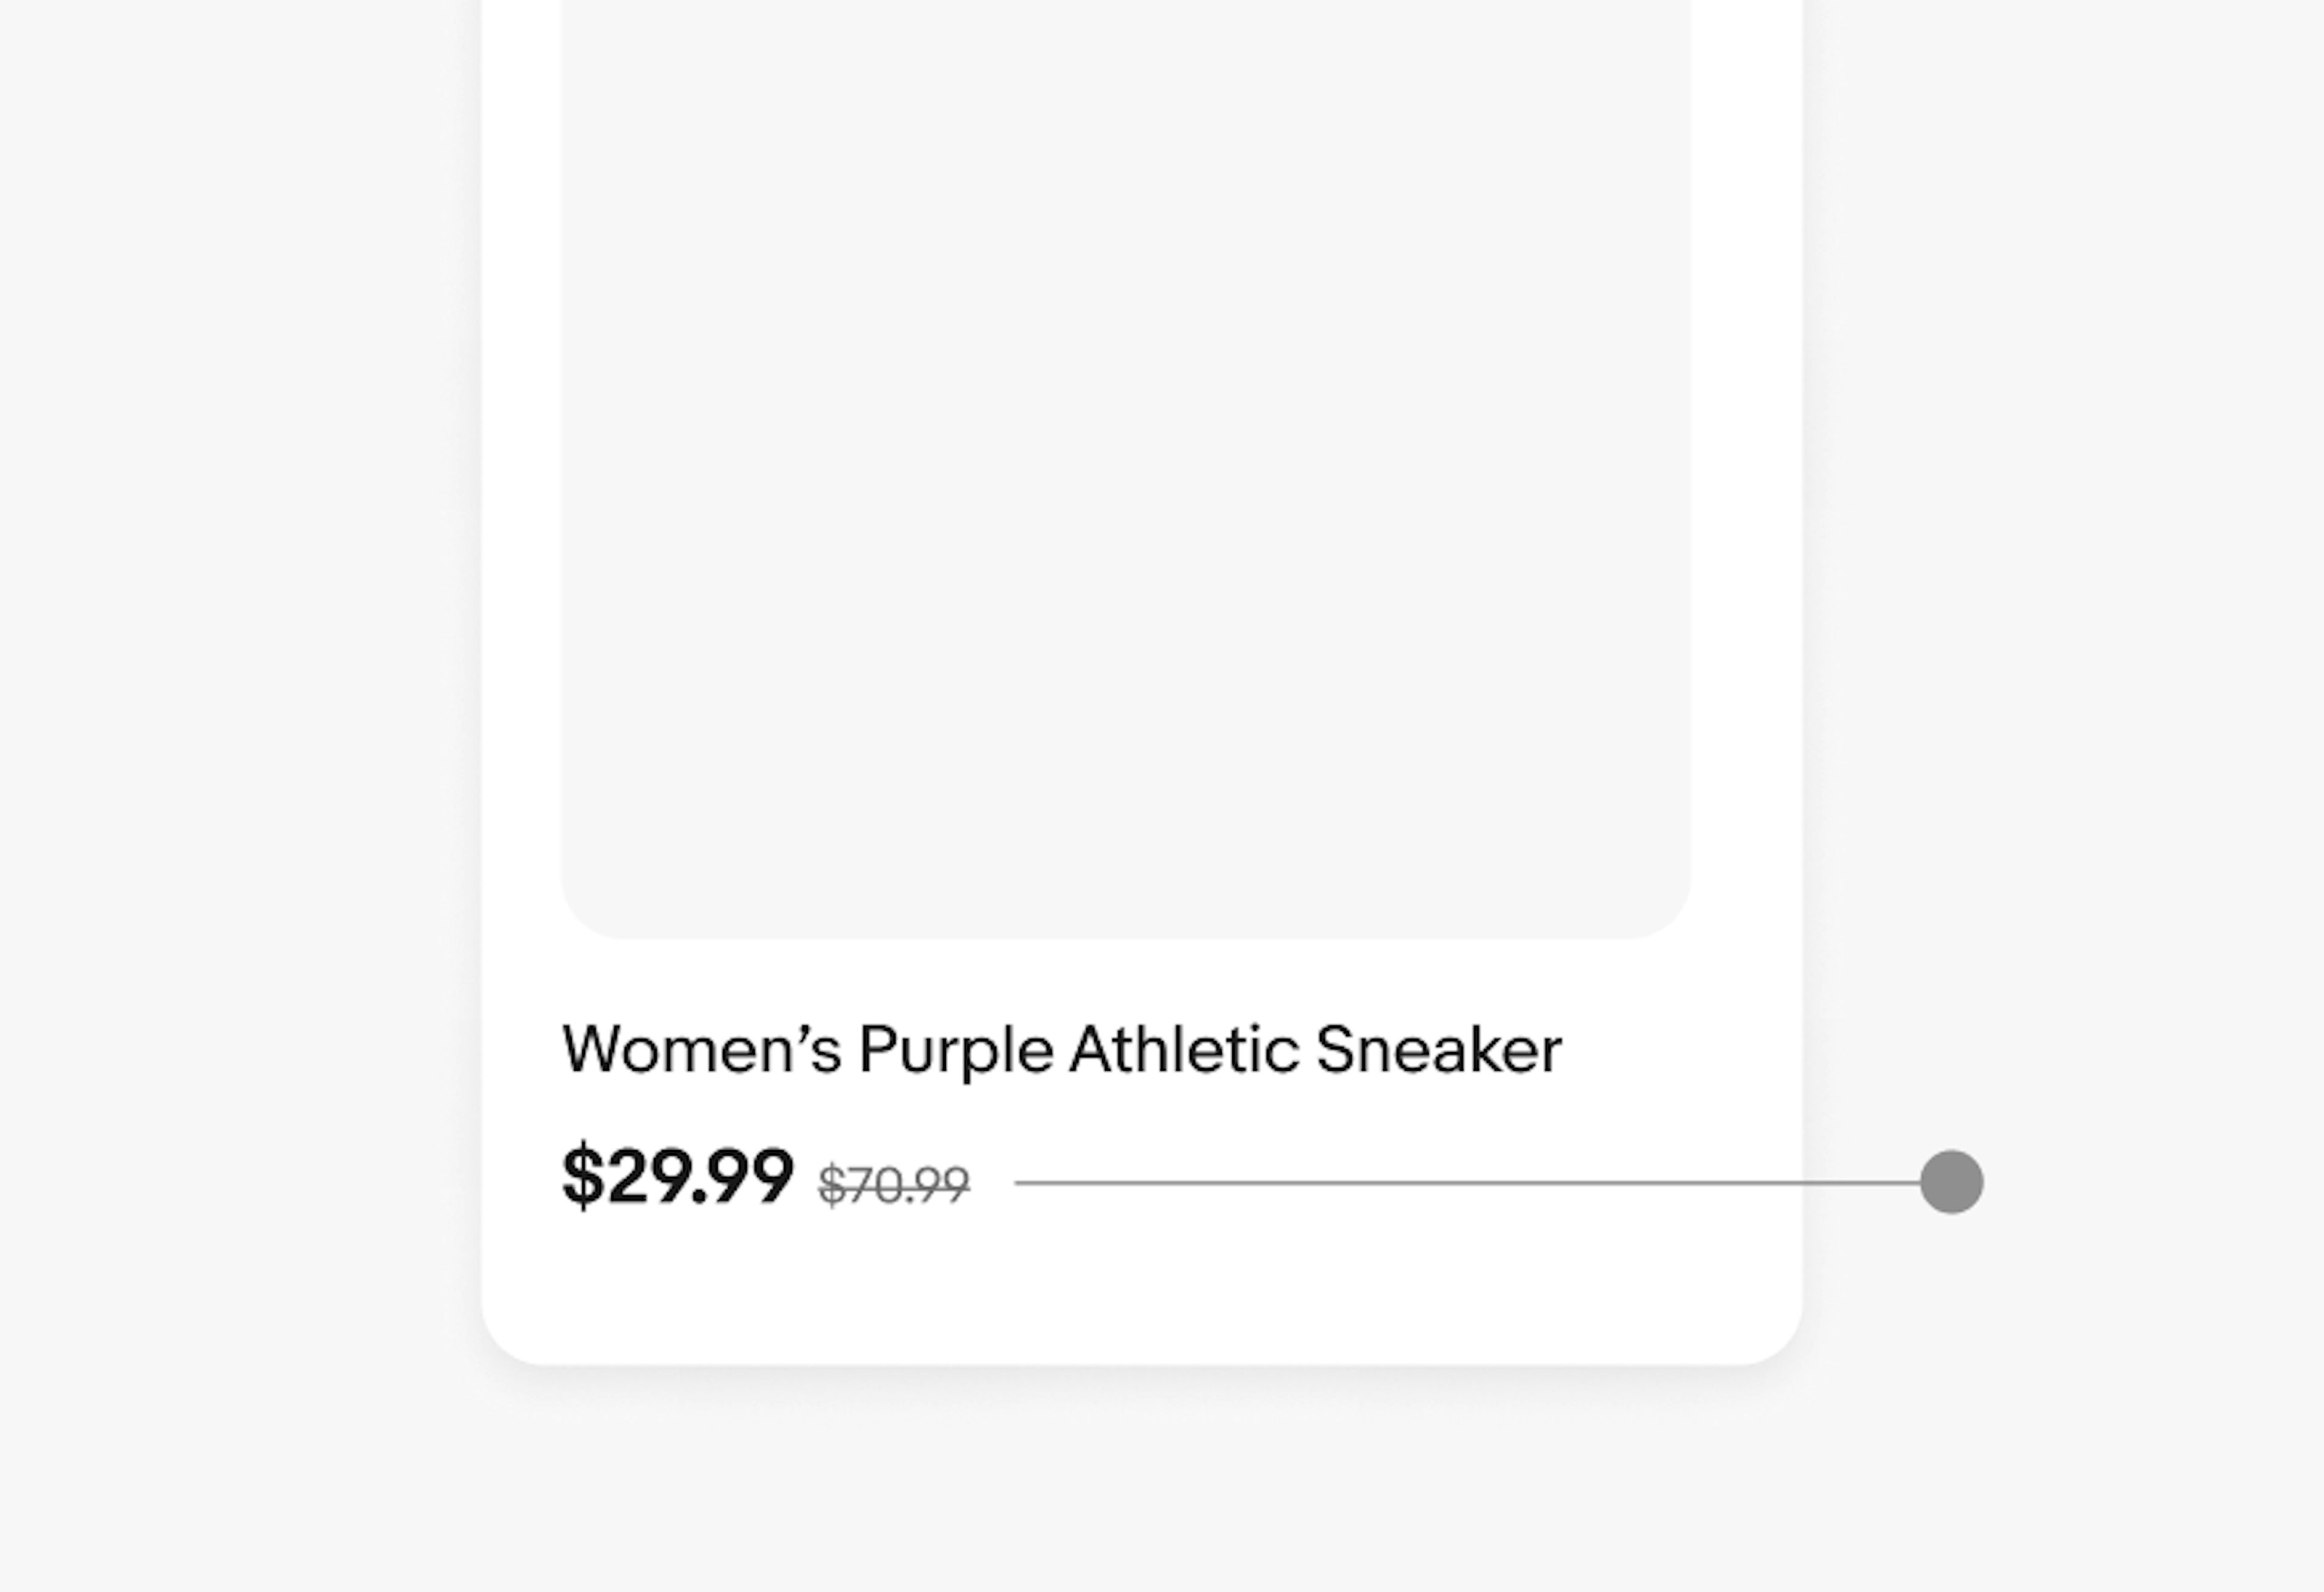 The strikethrough “$70.99” next to a bold price “$29.99” highlighted with a gray dot.